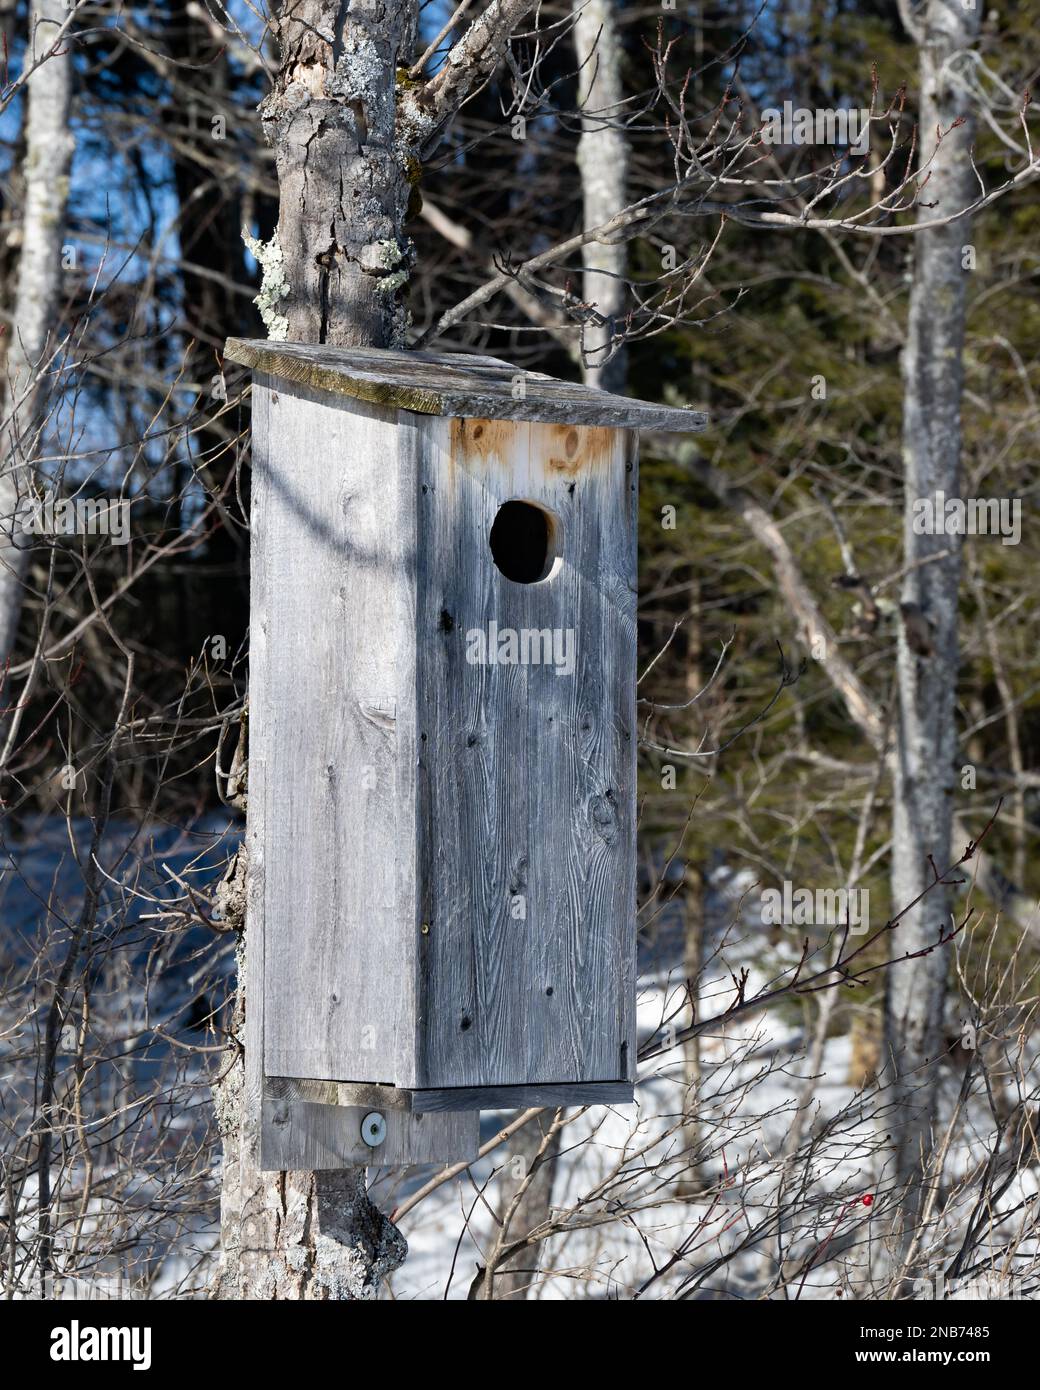 A wood duck house in winter along the banks of a river in the Adirondack Mountains, NY Stock Photo